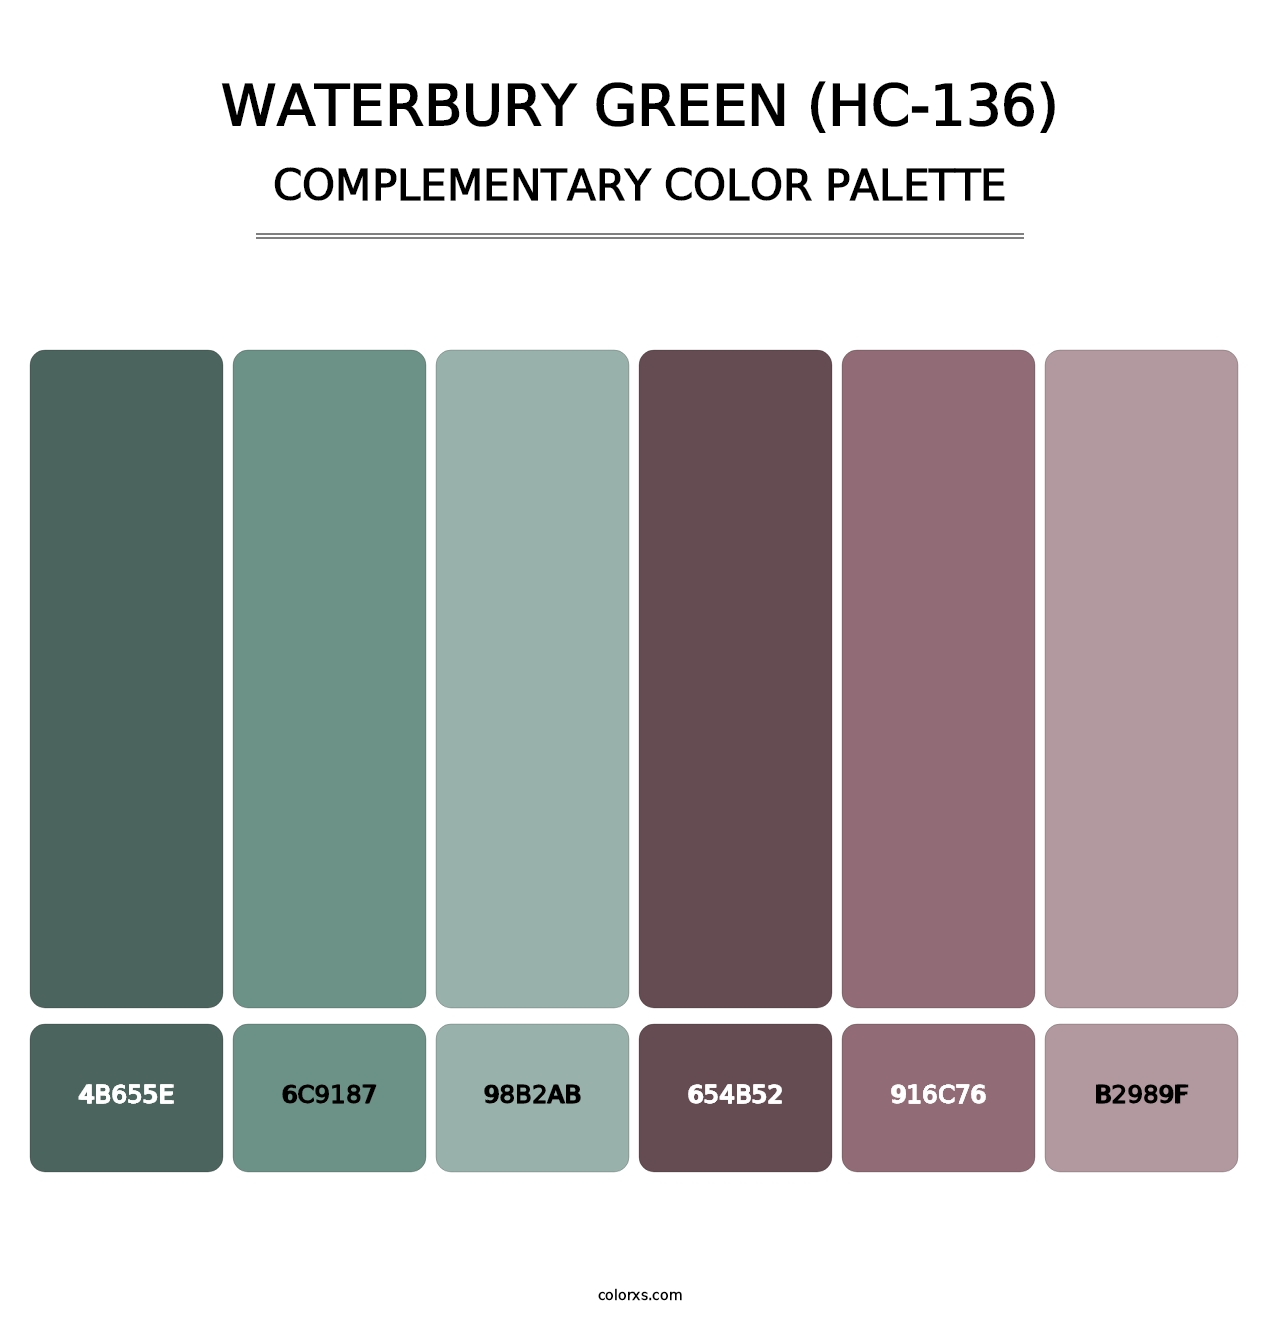 Waterbury Green (HC-136) - Complementary Color Palette